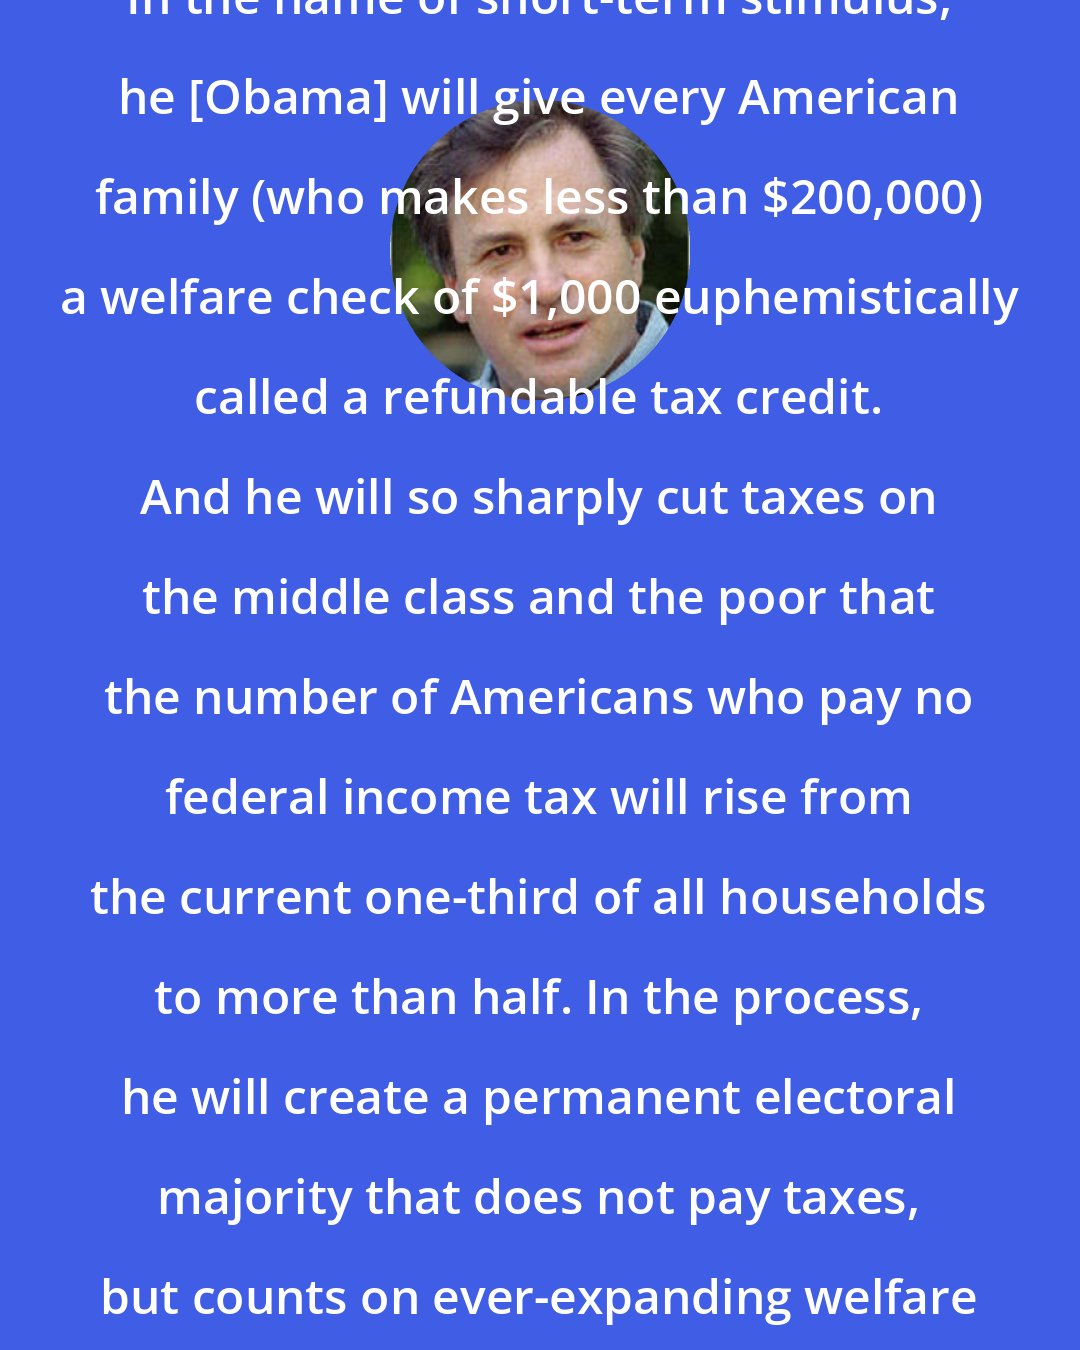 Dick Morris: In the name of short-term stimulus, he [Obama] will give every American family (who makes less than $200,000) a welfare check of $1,000 euphemistically called a refundable tax credit. And he will so sharply cut taxes on the middle class and the poor that the number of Americans who pay no federal income tax will rise from the current one-third of all households to more than half. In the process, he will create a permanent electoral majority that does not pay taxes, but counts on ever-expanding welfare checks from the government.